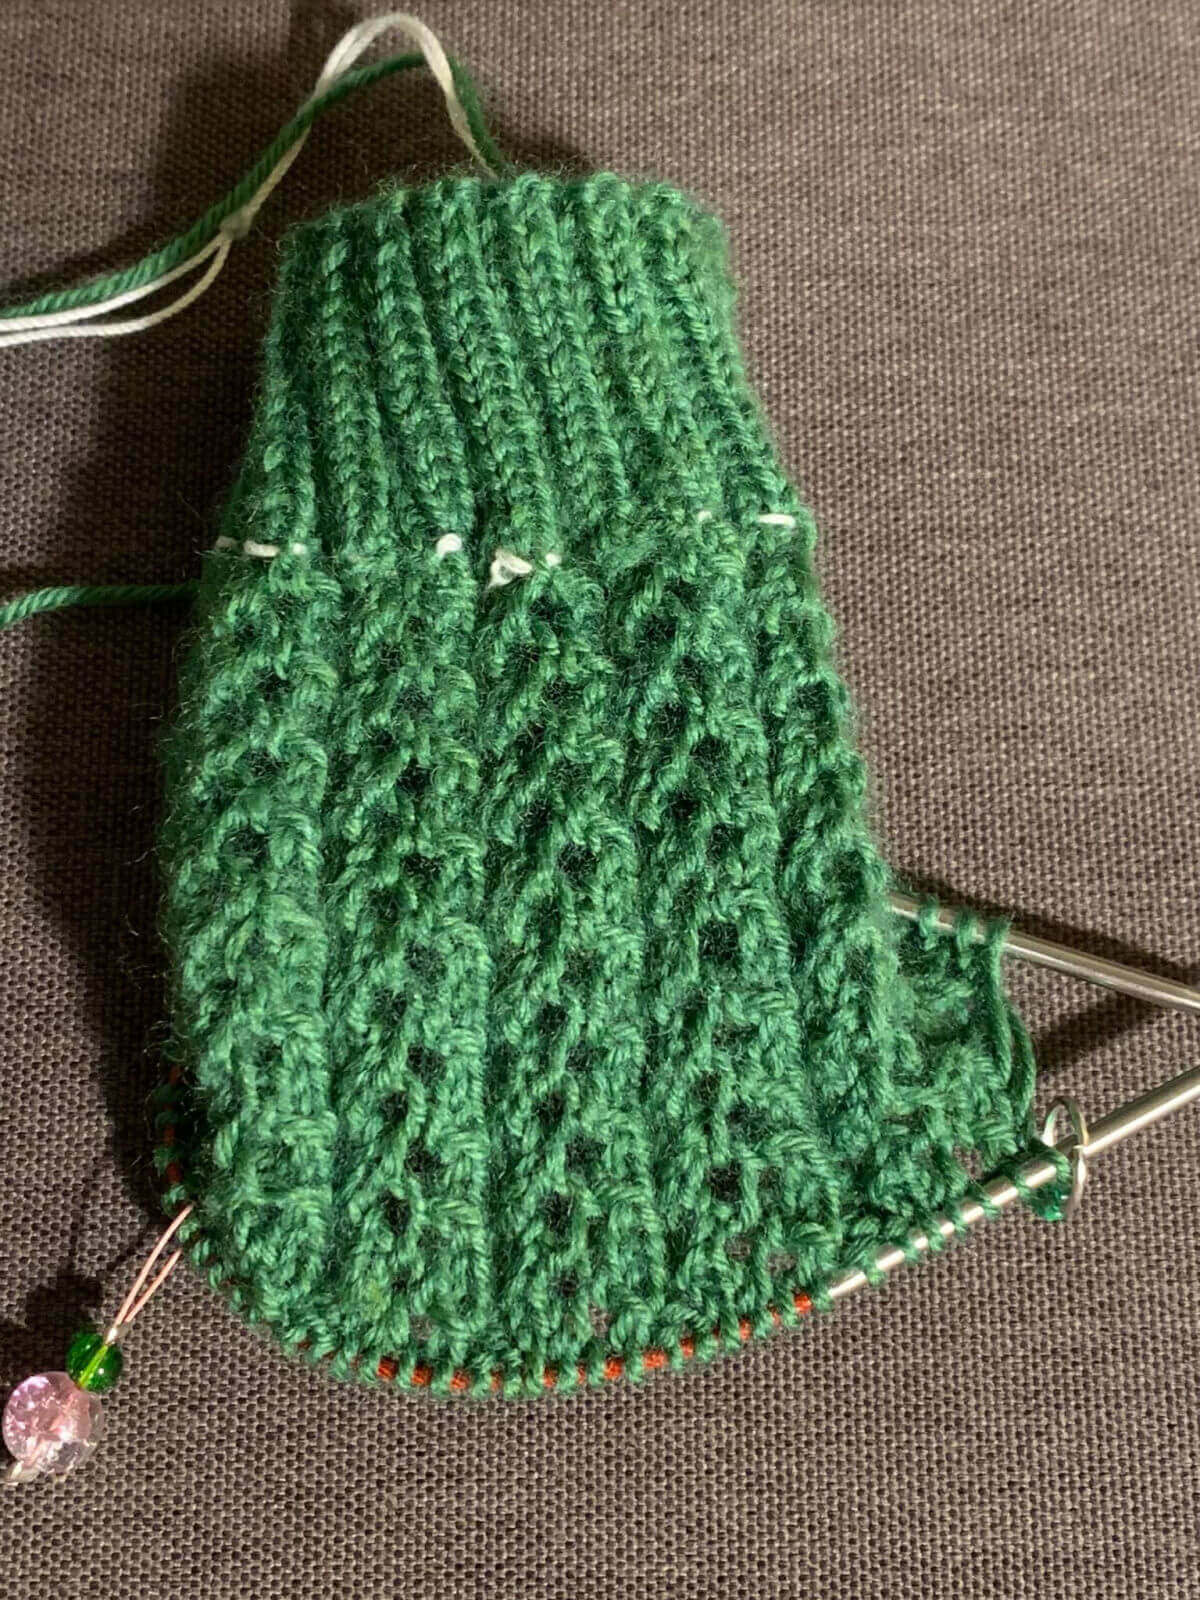 A half-knitted Easy Lace Sock in green yarn